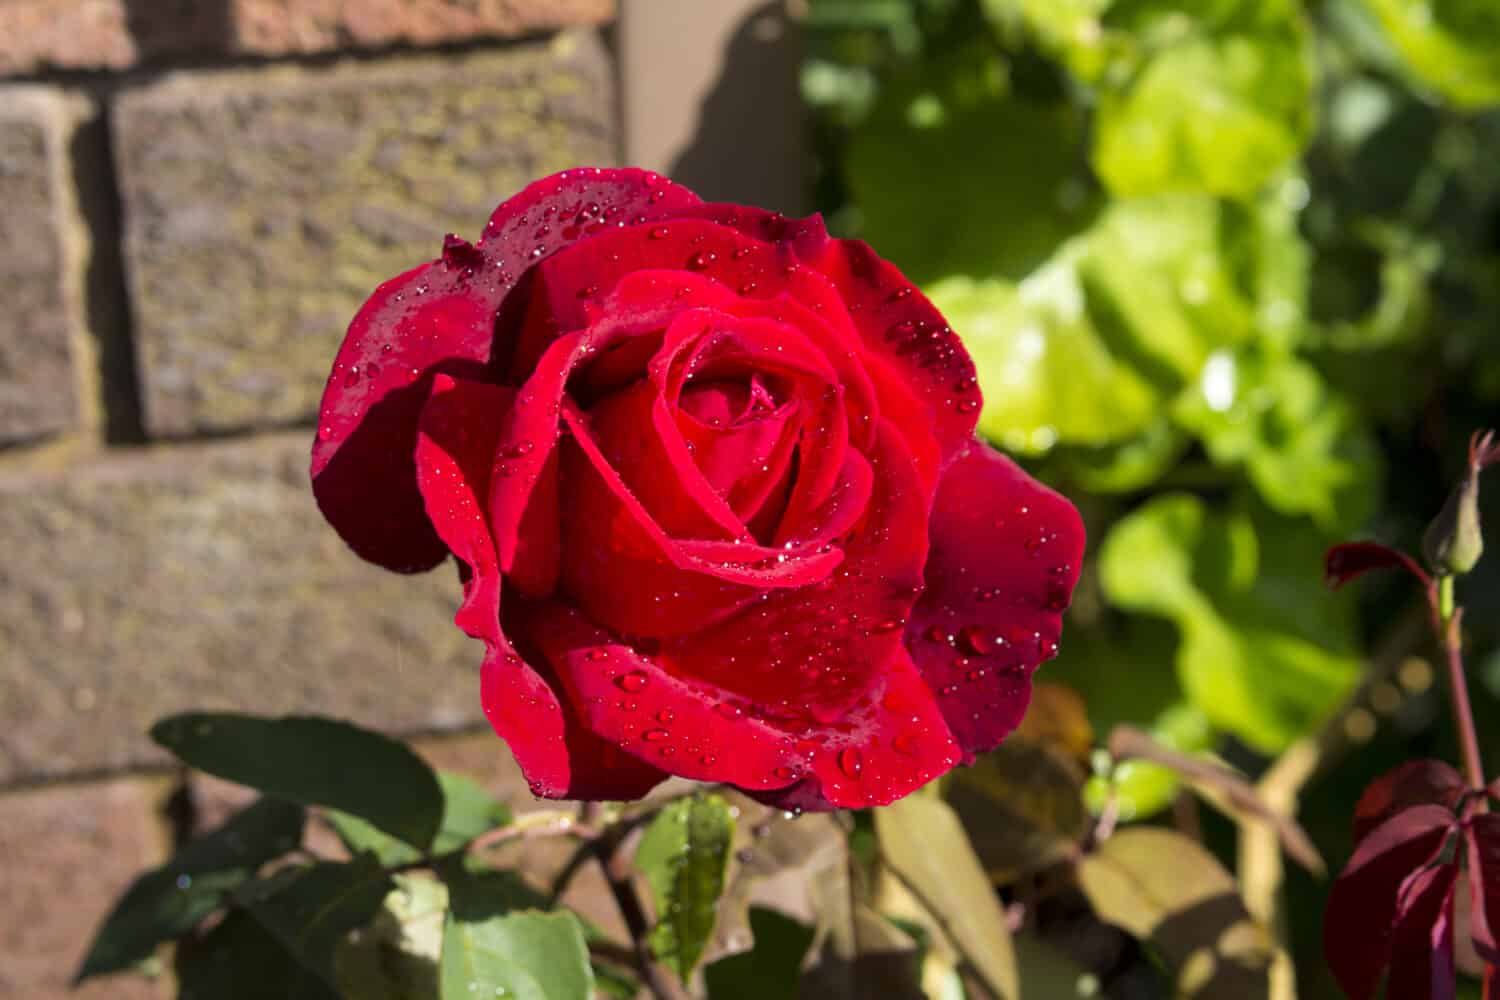 Beautiful  scented romantic  intense  red Climbing Chrysler Imperial   hybrid tea  rose in bloom in early spring after a shower of rain  adds charming color  and intense perfume to the garden.